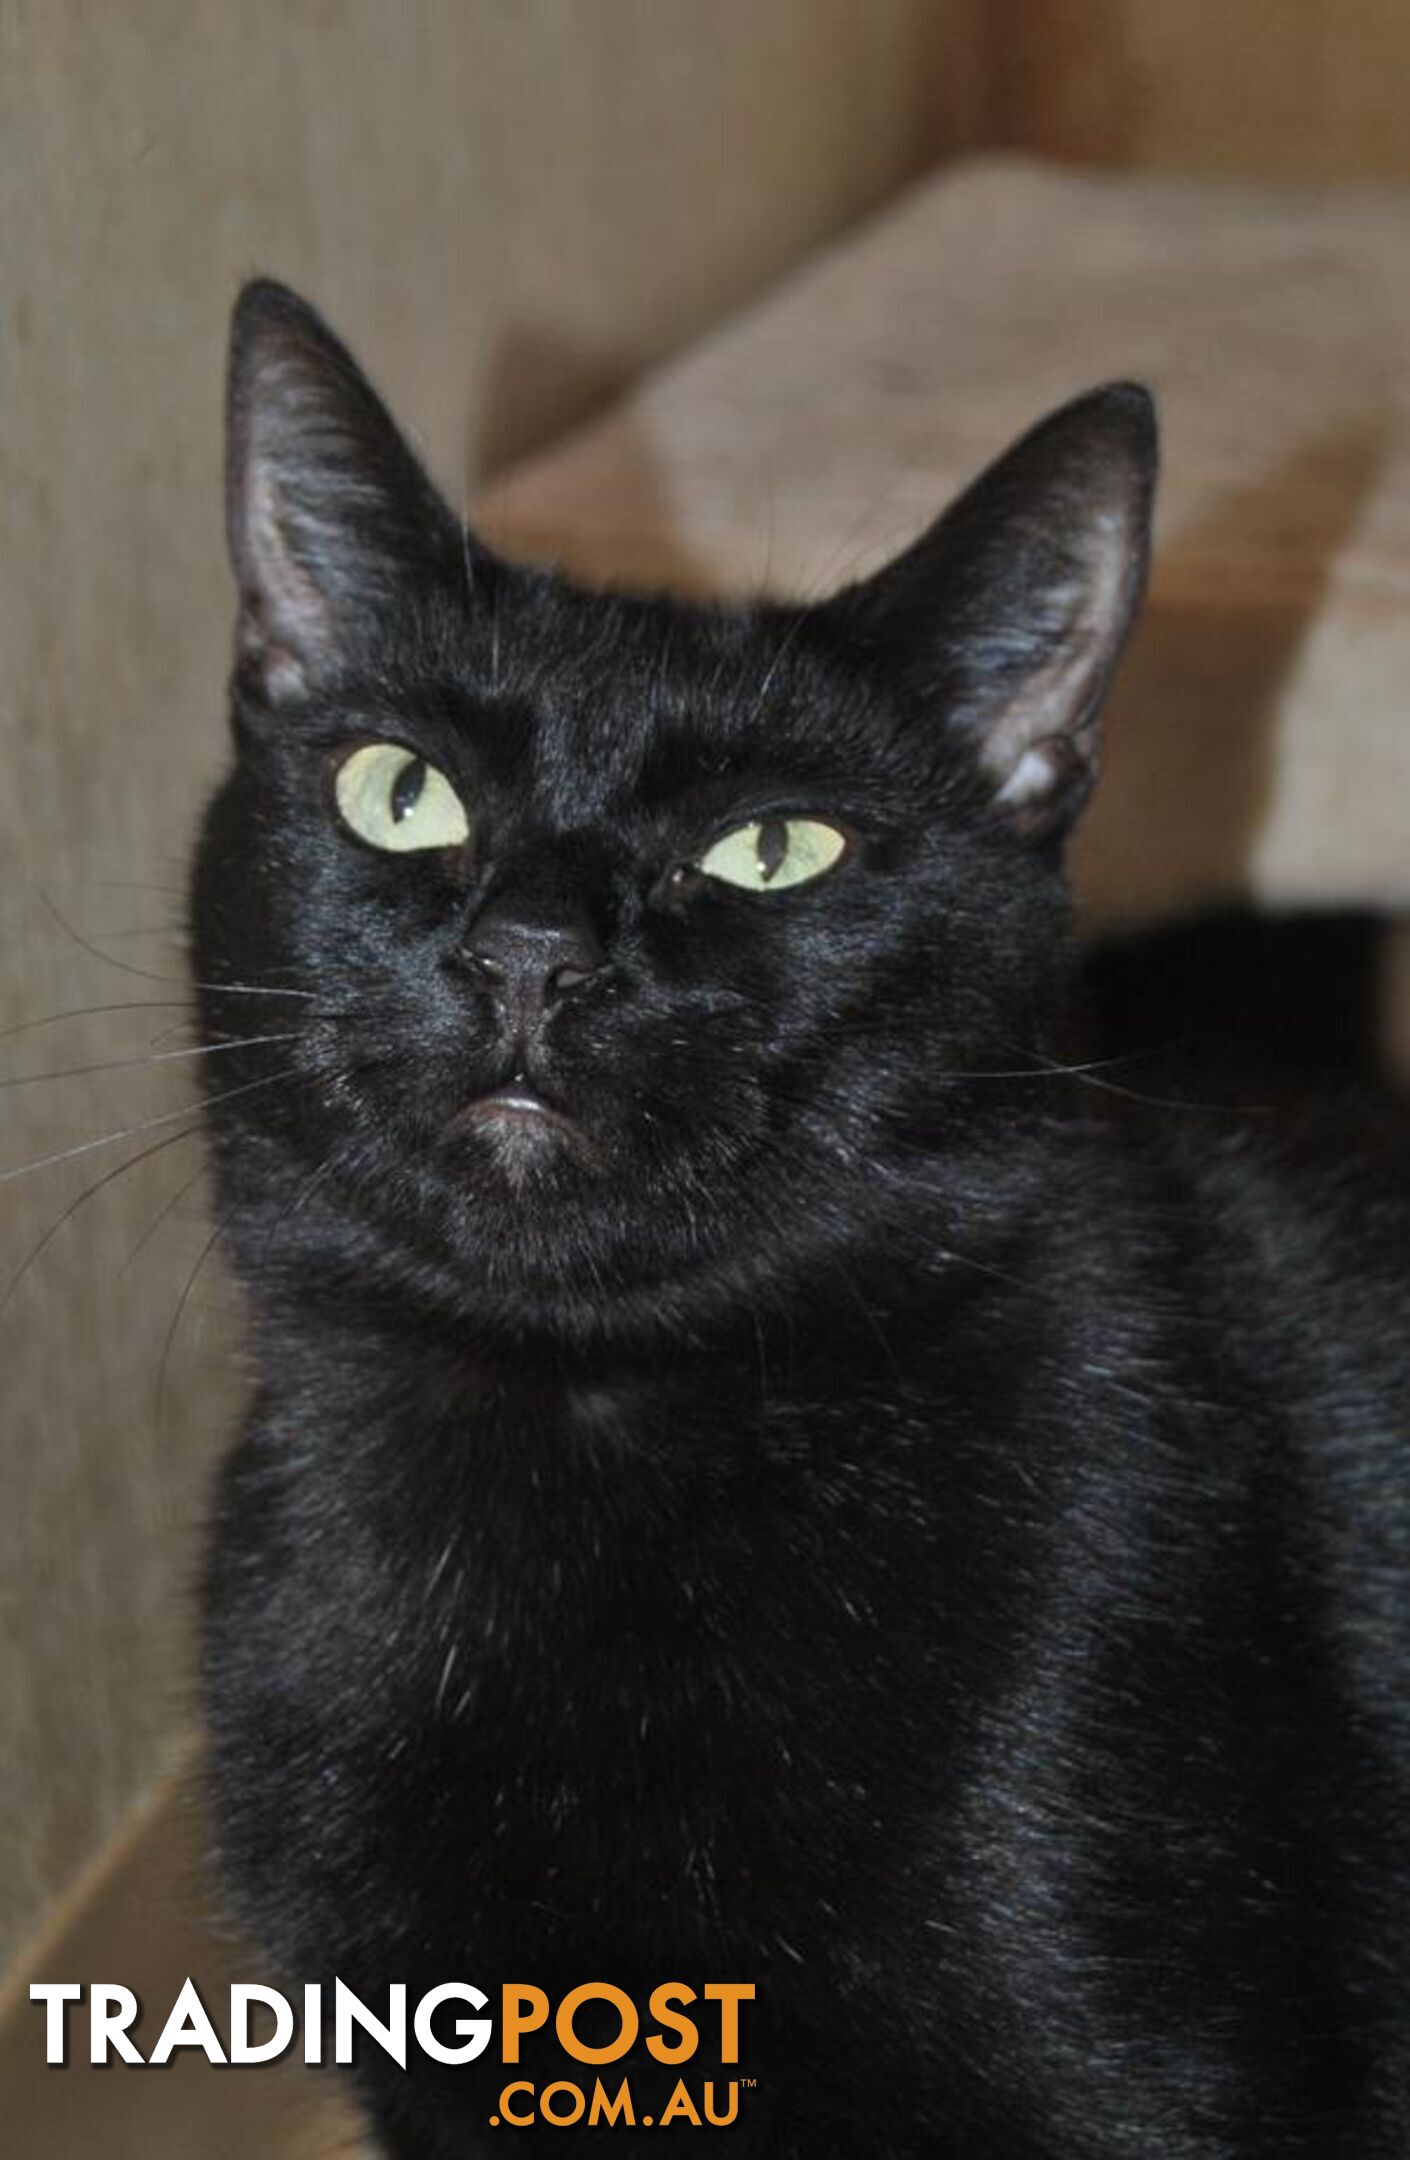 Nashi - Domestic Short Hair, 2 Years 10 Months 1 Week (approx)